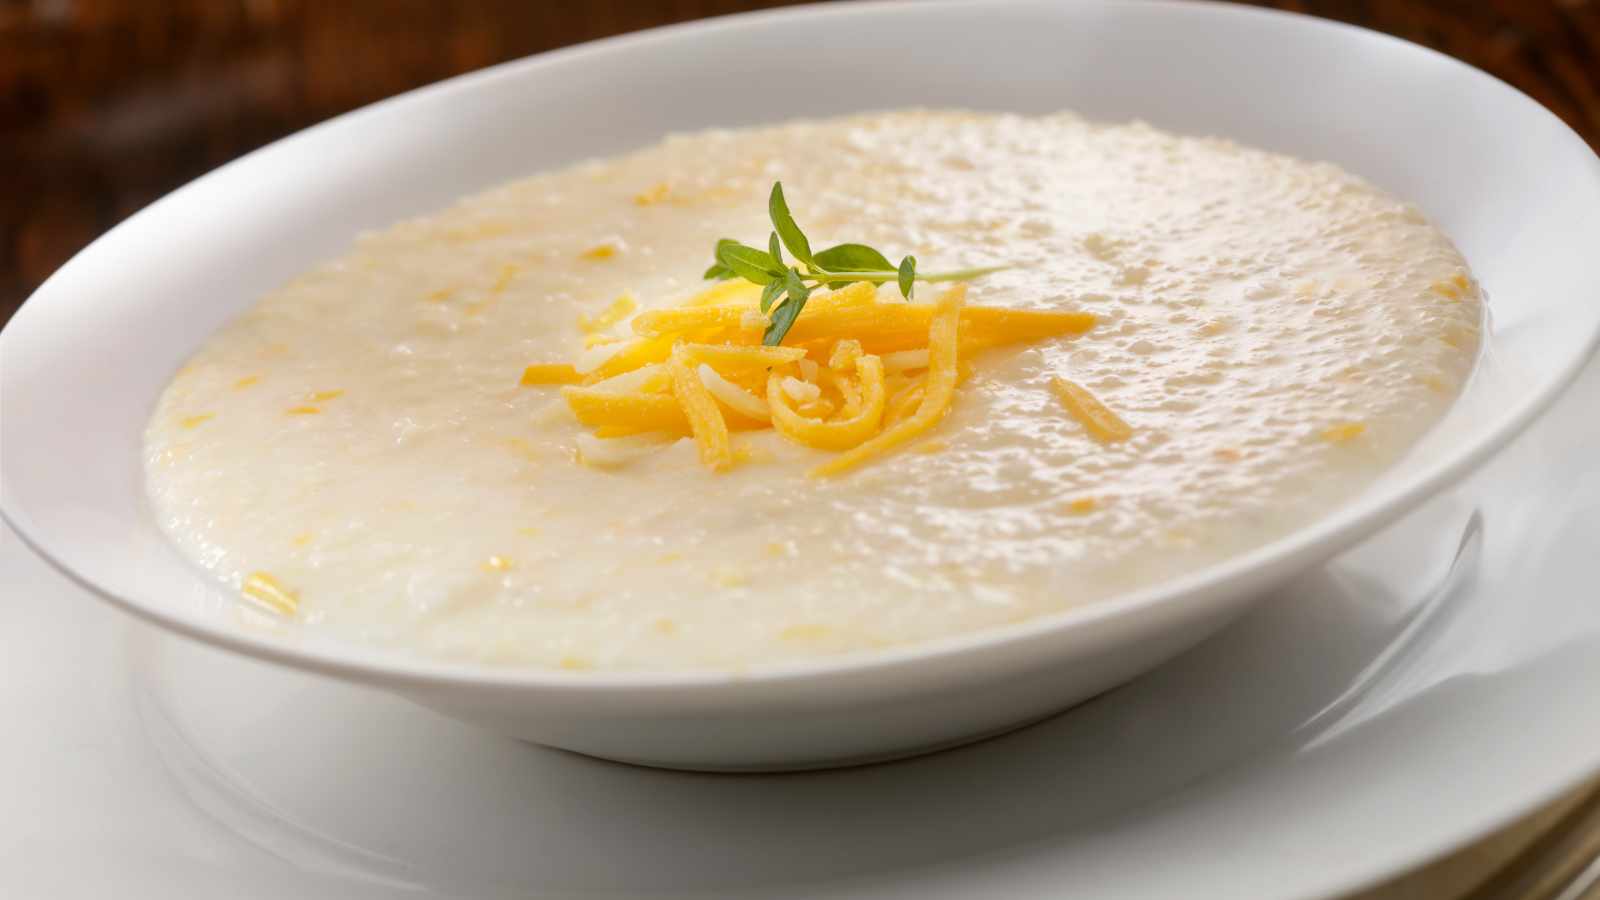 Creamy cheese grits in a plate